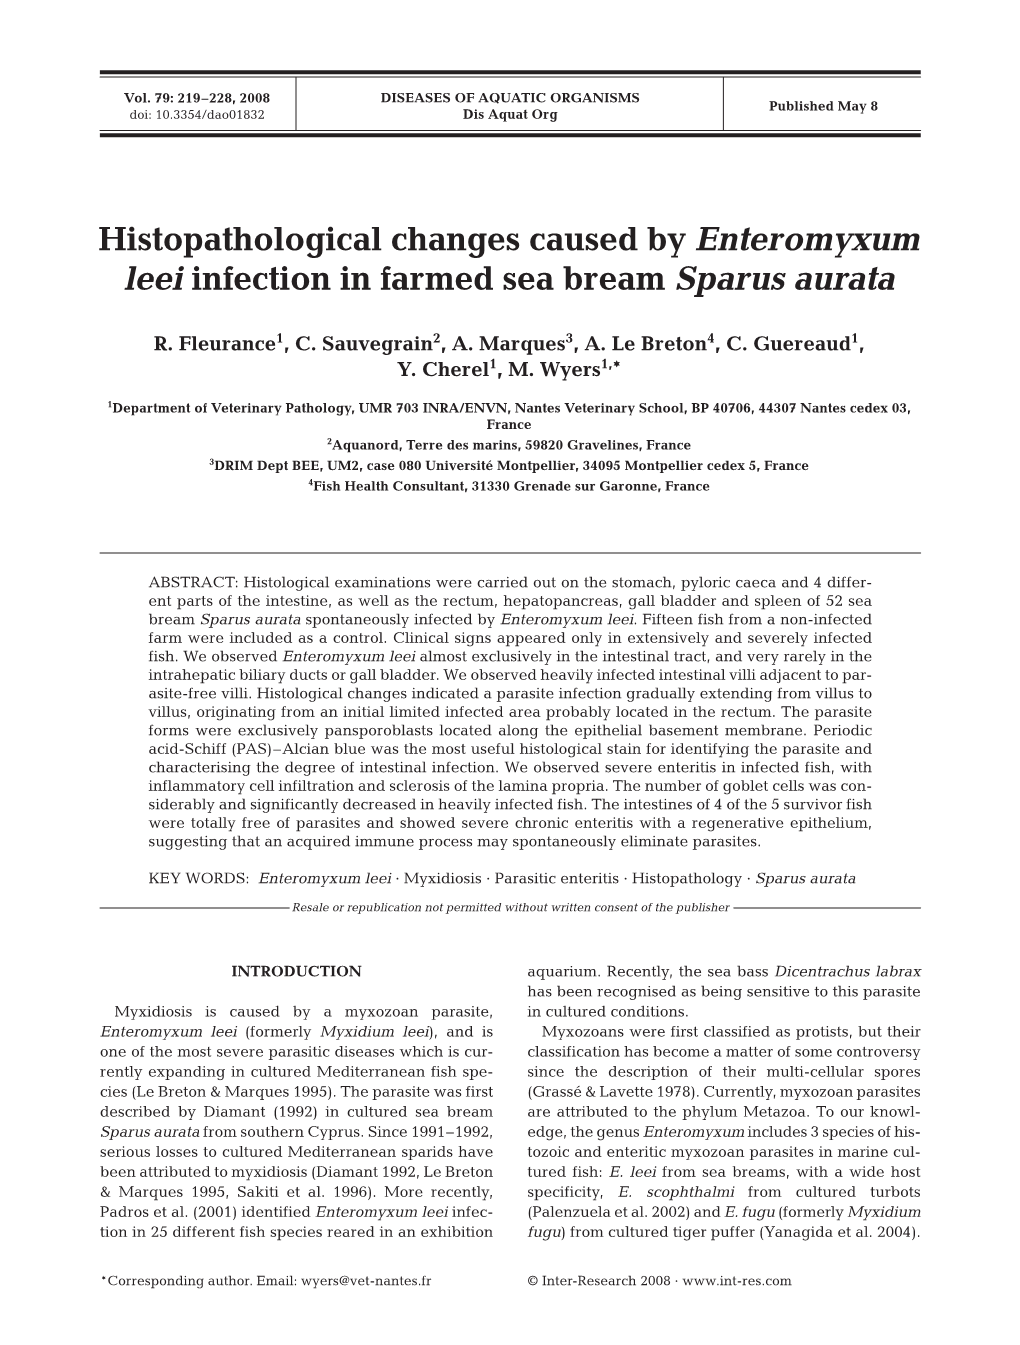 Histopathological Changes Caused by Enteromyxum Leei Infection in Farmed Sea Bream Sparus Aurata